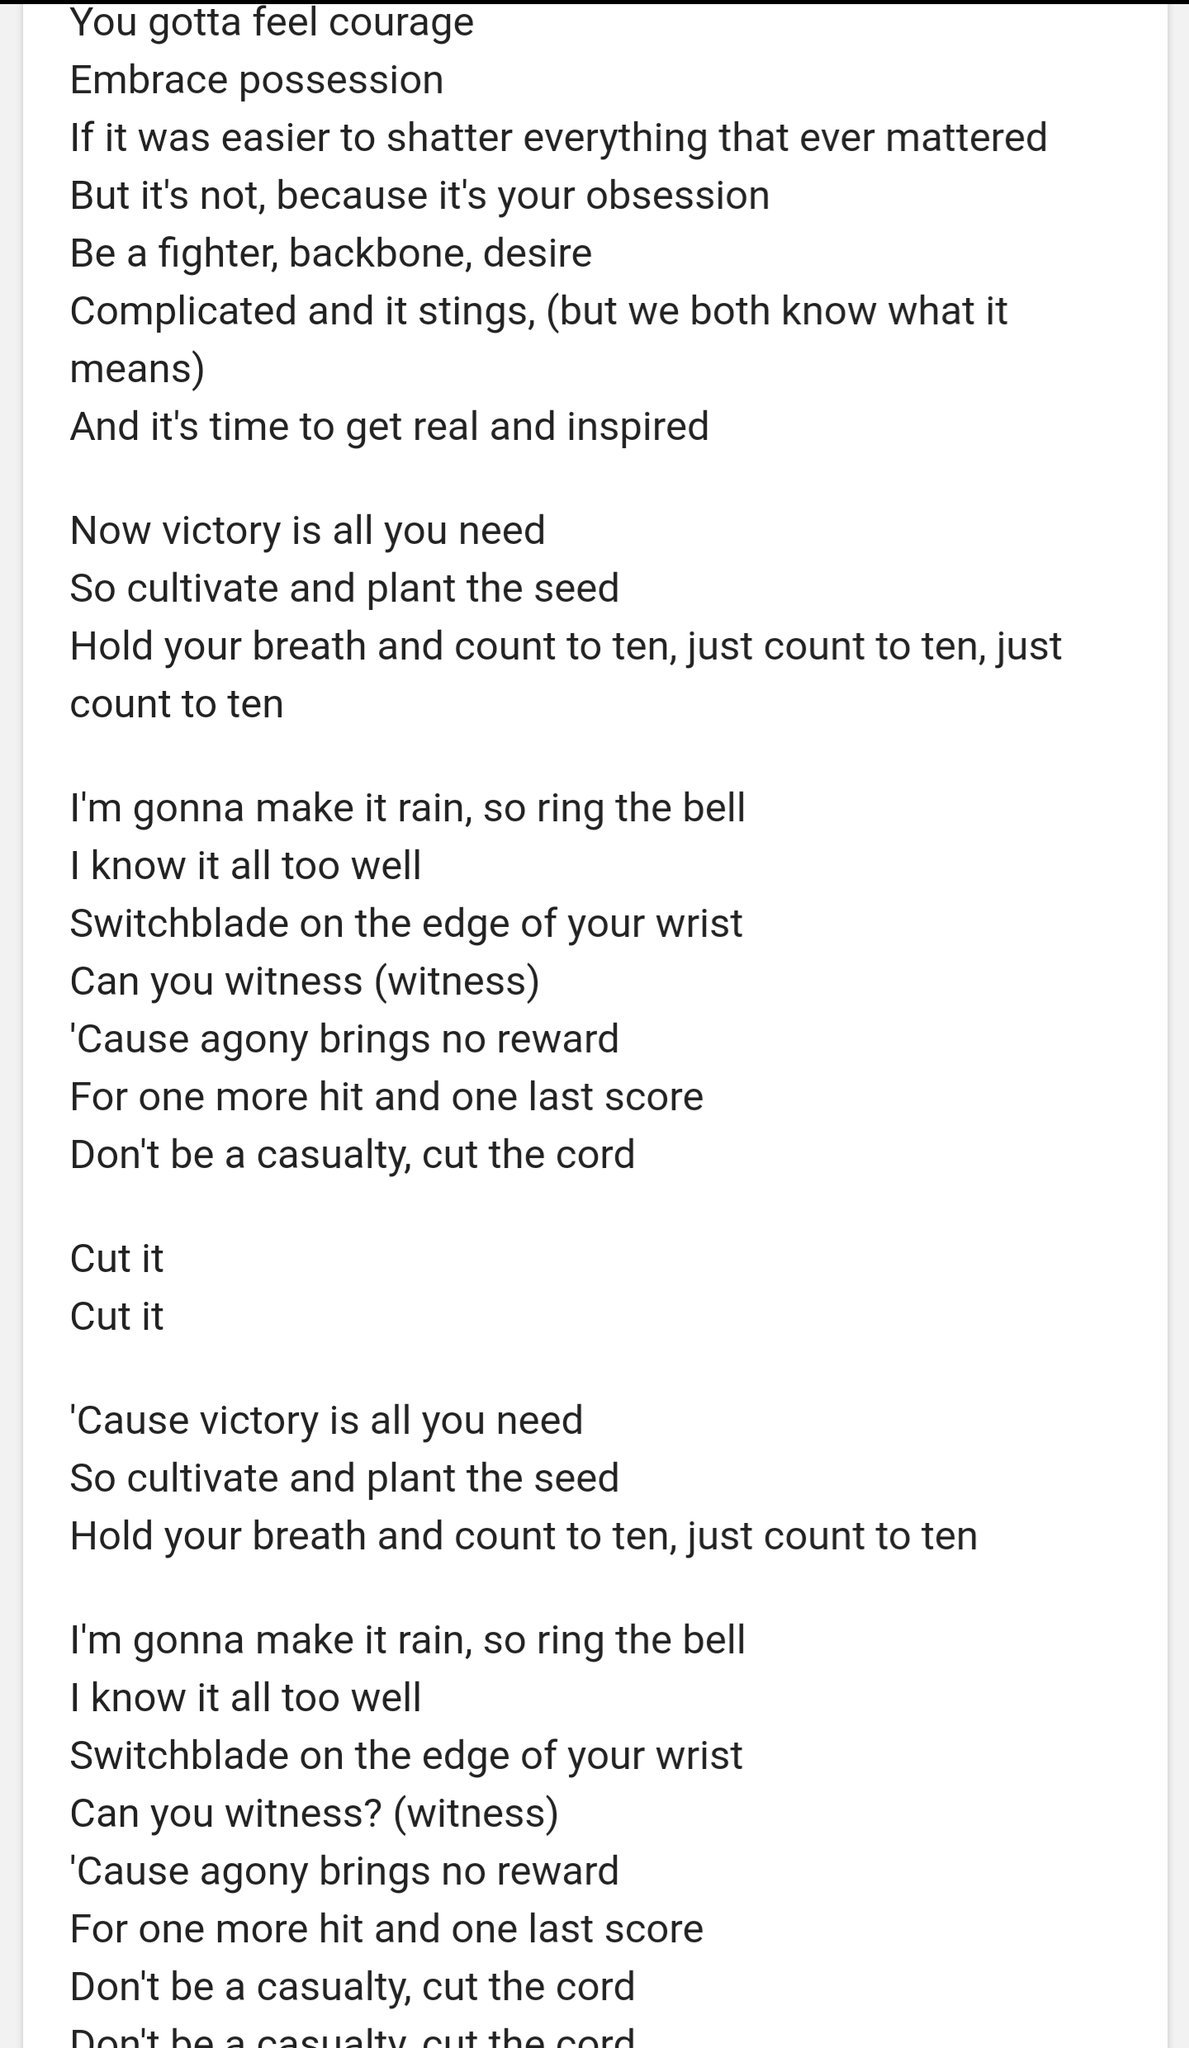 SHINEDOWN on X: ""Can I get a Witness" 😉 RT @Leafs_Tk: Love this song by  @Shinedown "Cut the Cord" is one hell of a song https://t.co/NHjDa9kjwd" / X